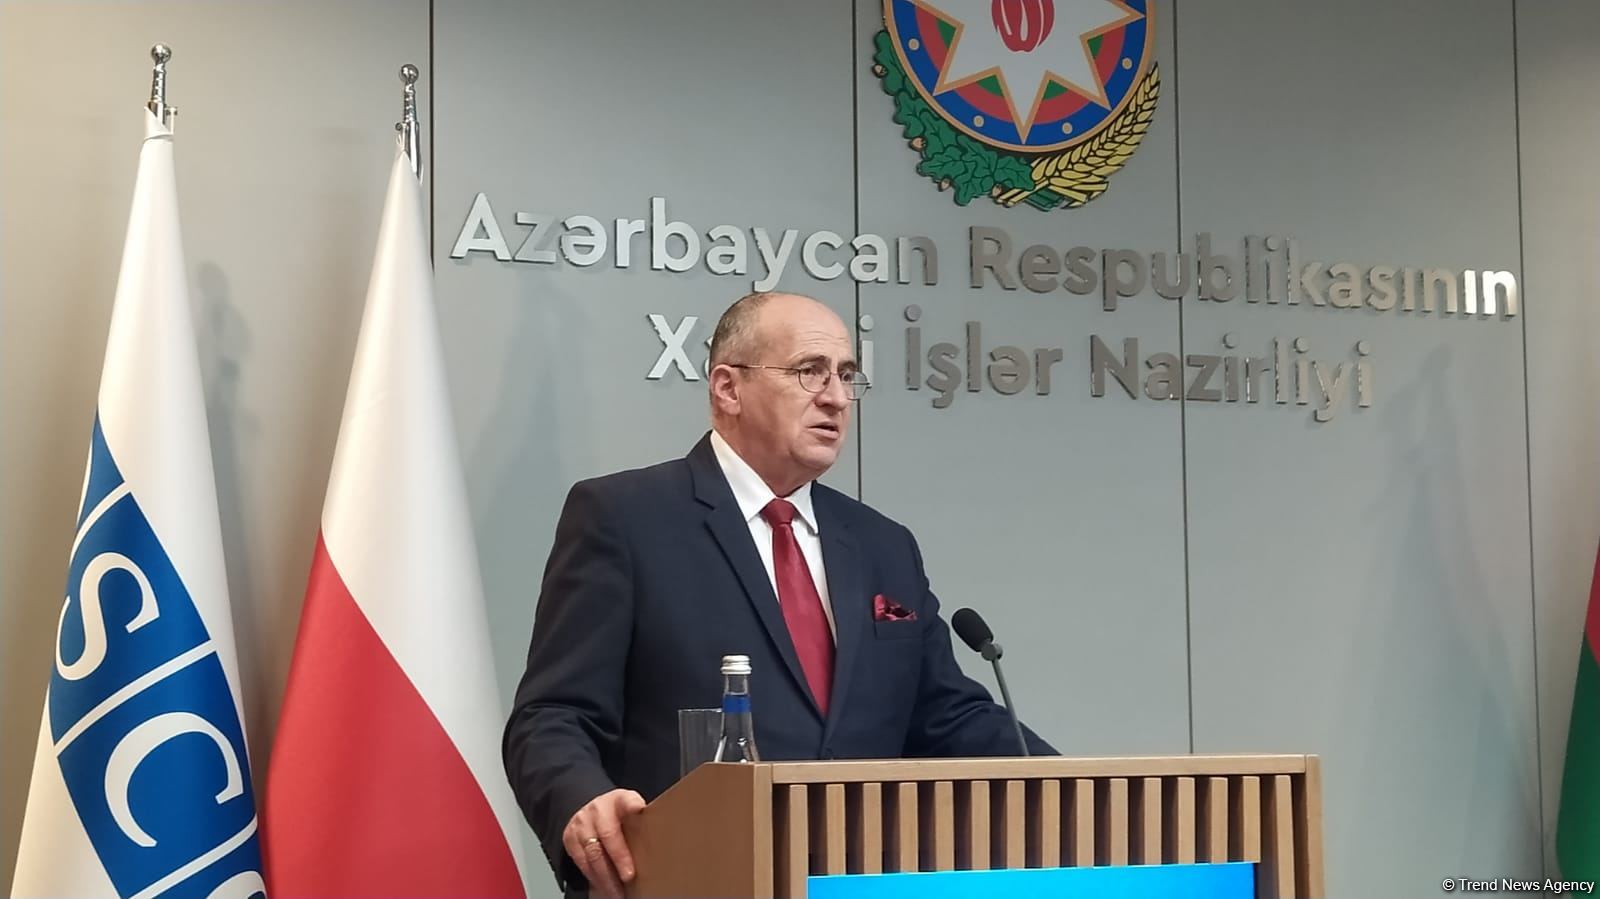 Poland highly appreciates relations with Azerbaijan - OSCE Chairman-in-Office